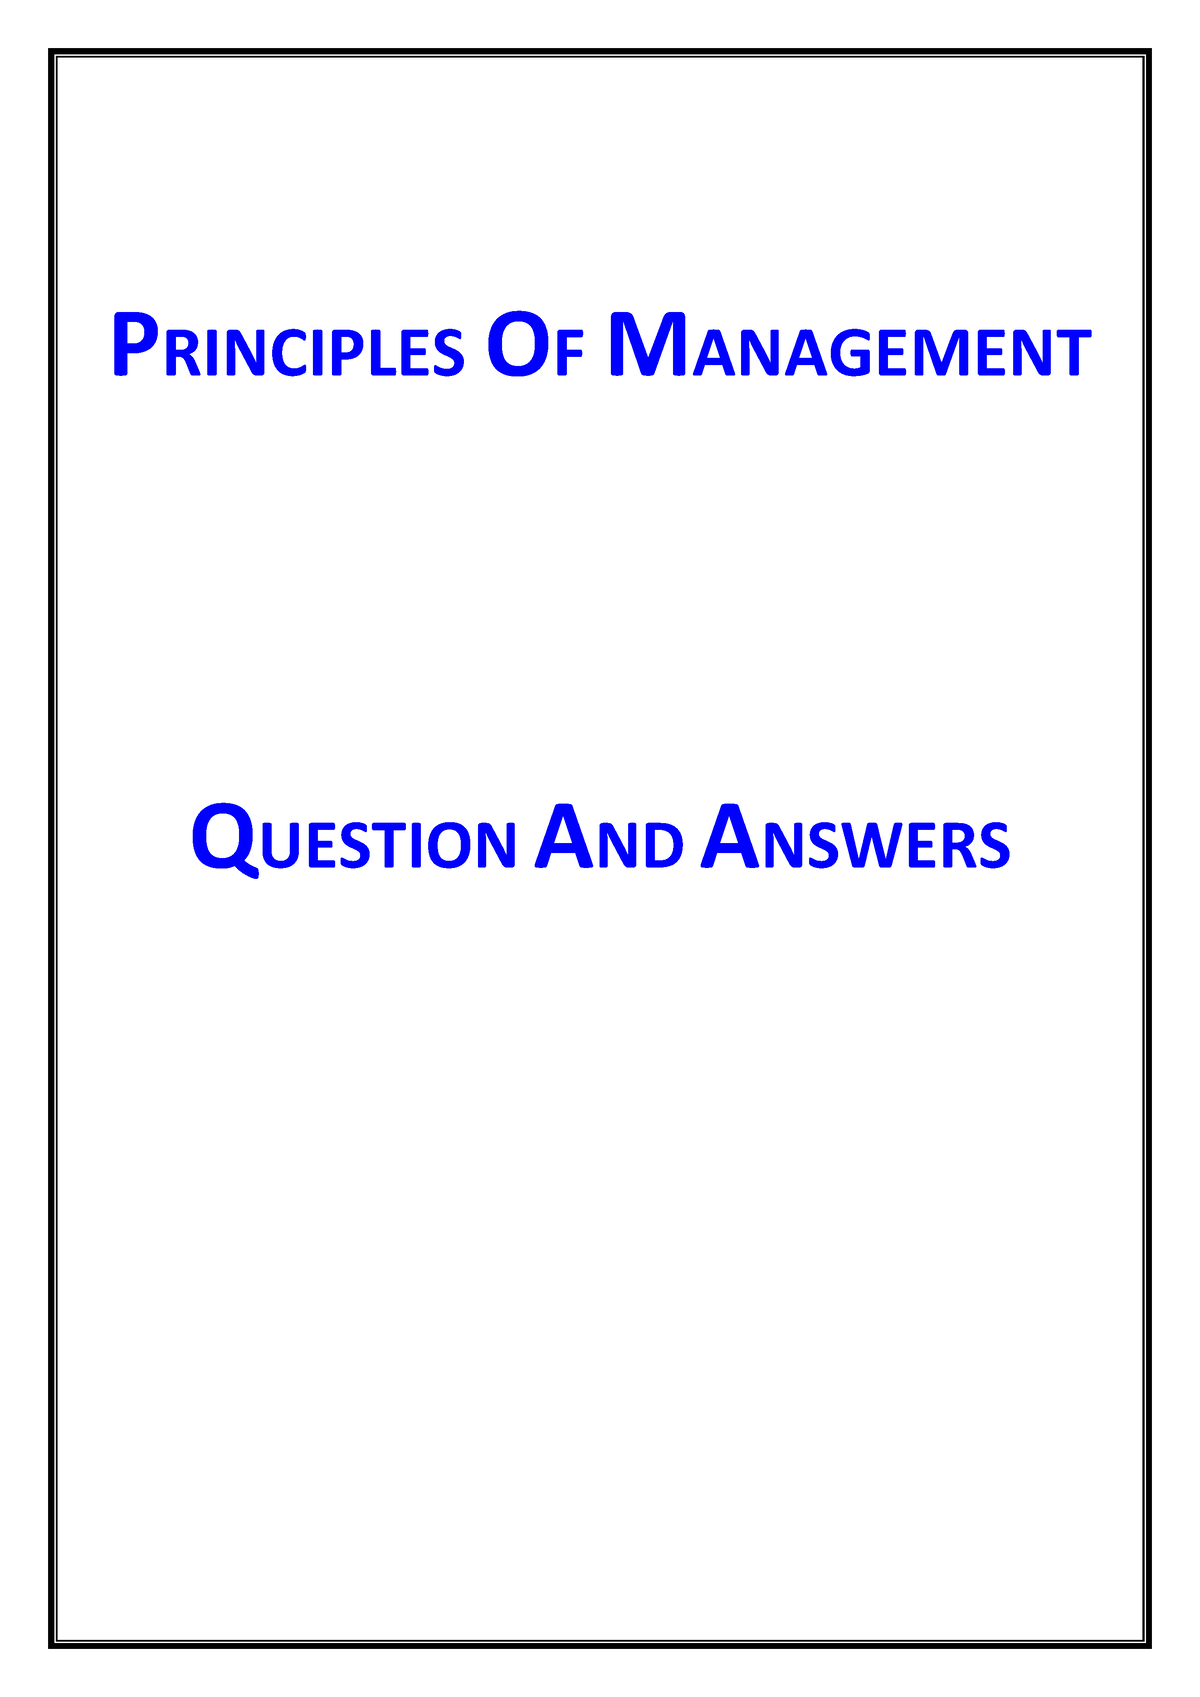 principles of management case study with questions and answers pdf